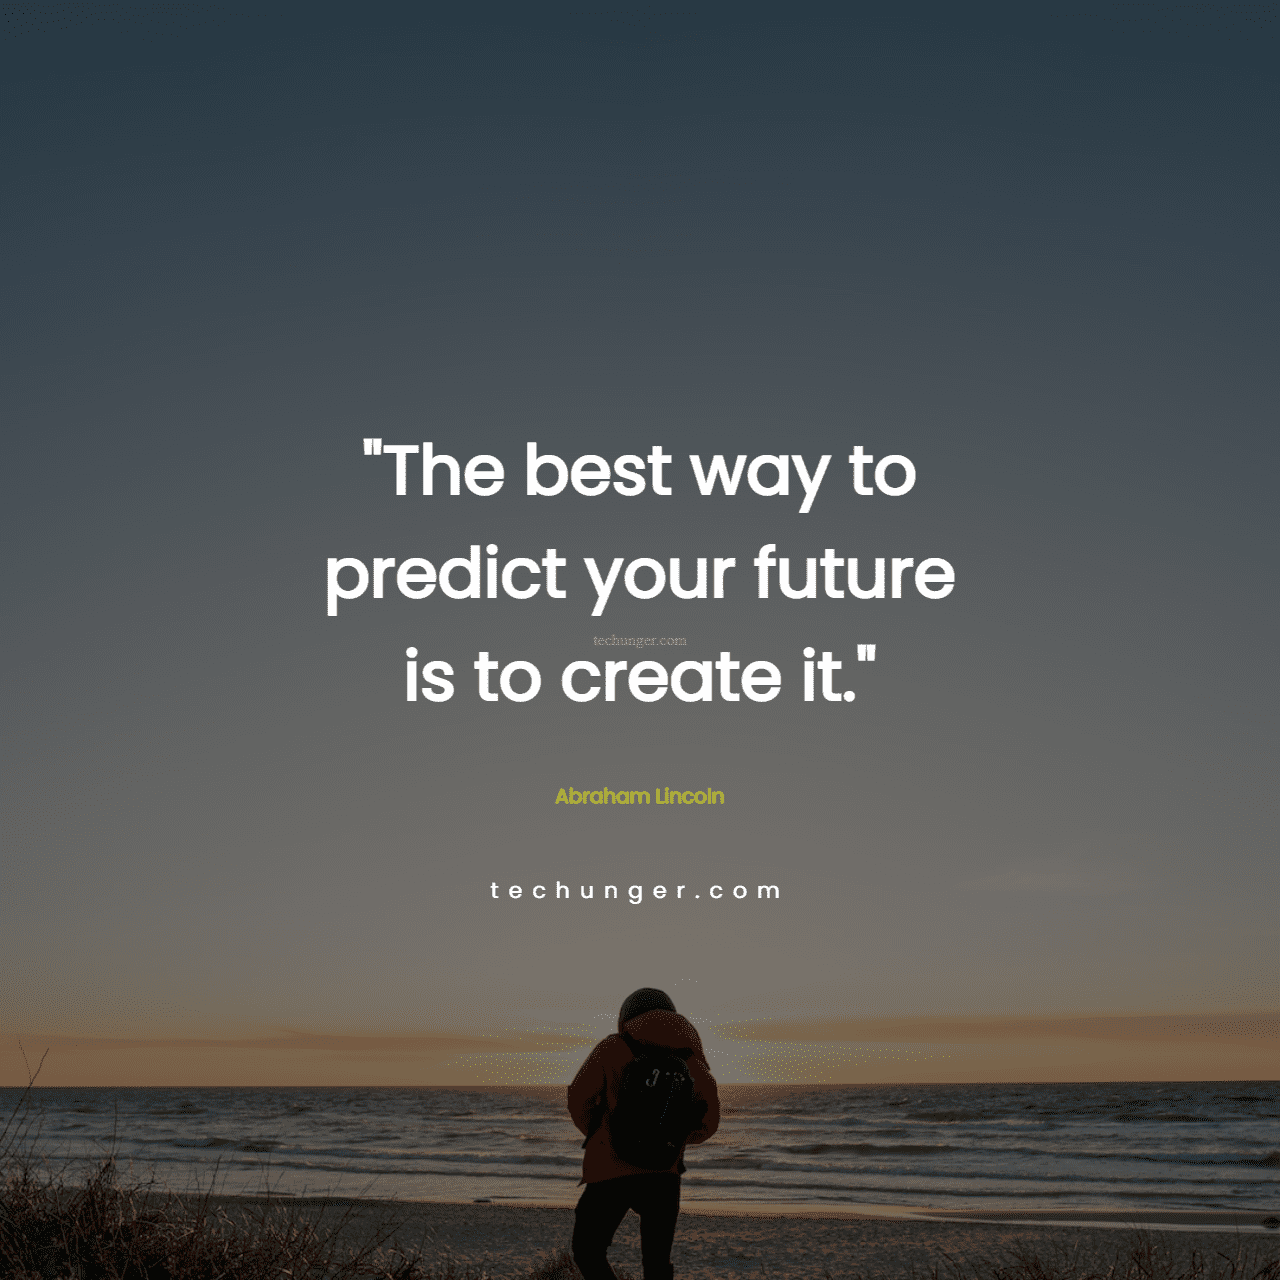 motivational,inspirational,quotes,
  The best way to predict your future is to create it. 
  Aaham Lincoln
